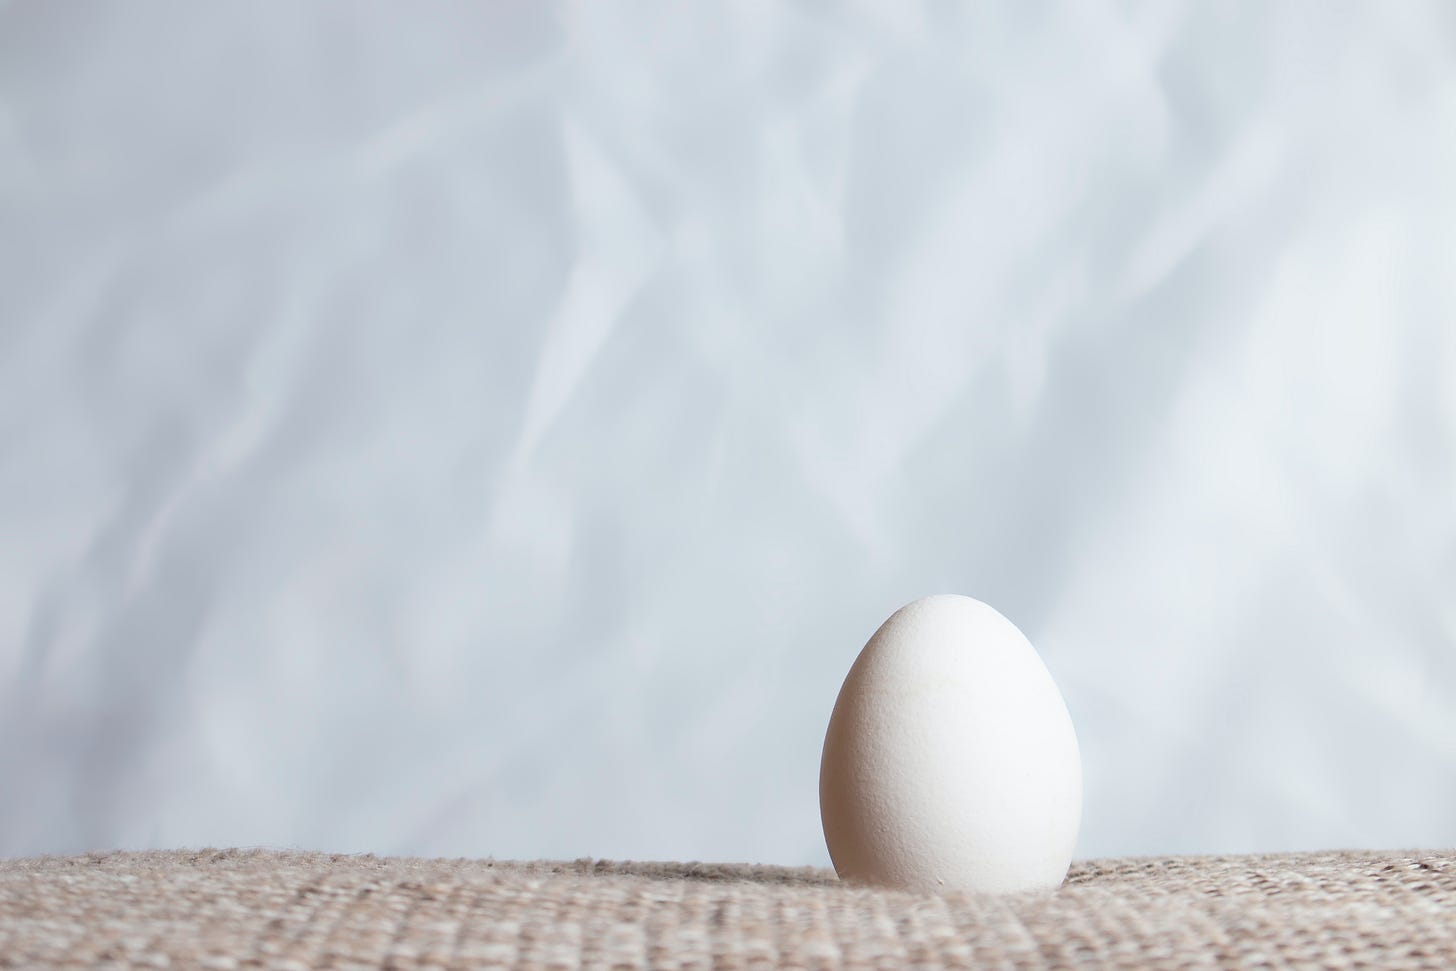 A single egg with a papery background